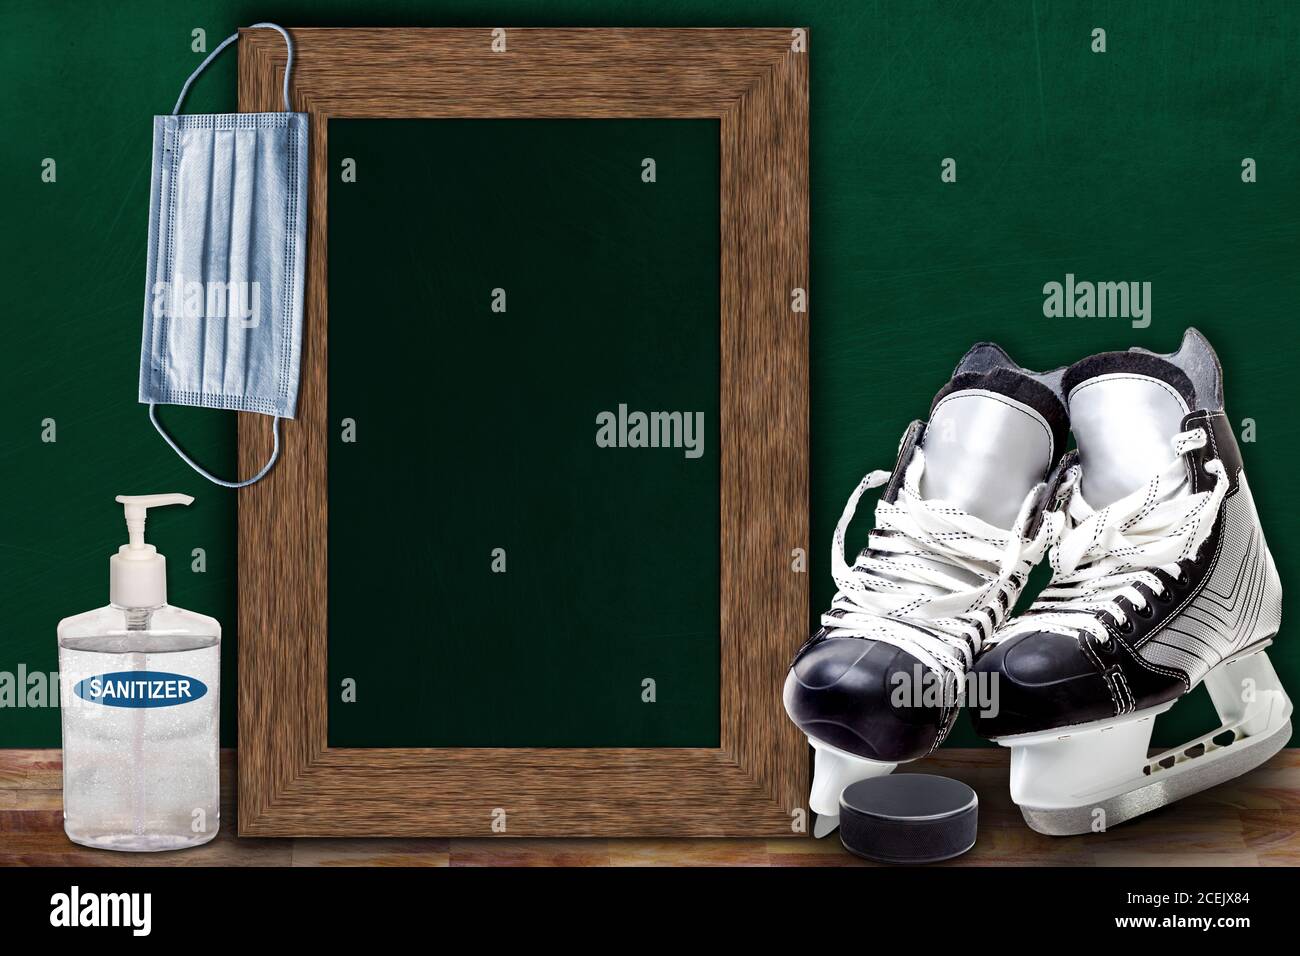 COVID-19 new normal sports concept in a classroom setting showing framed chalkboard with copy space and ice hockey skates and puck on wooden table. Stock Photo